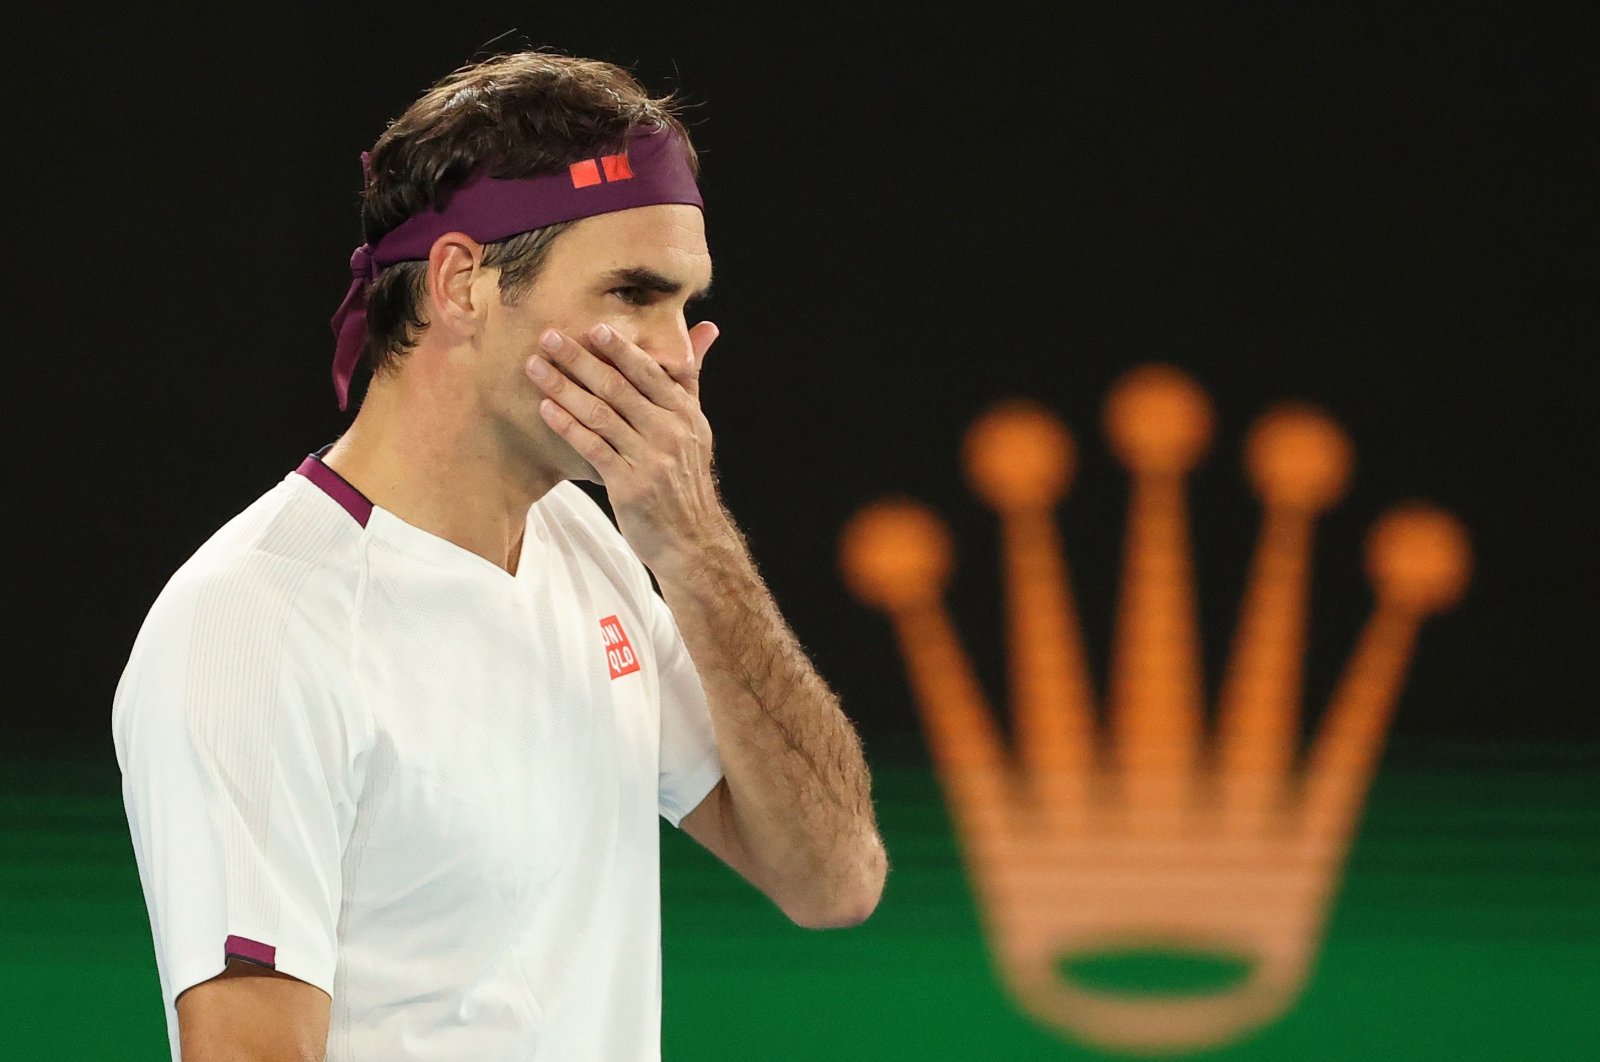 Switzerland's Roger Federer gestures after a point against Hungary's Marton Fucsovics during their men's singles match on day seven of the Australian Open tennis tournament in Melbourne, Australia, Jan. 26, 2020. (AFP Photo)